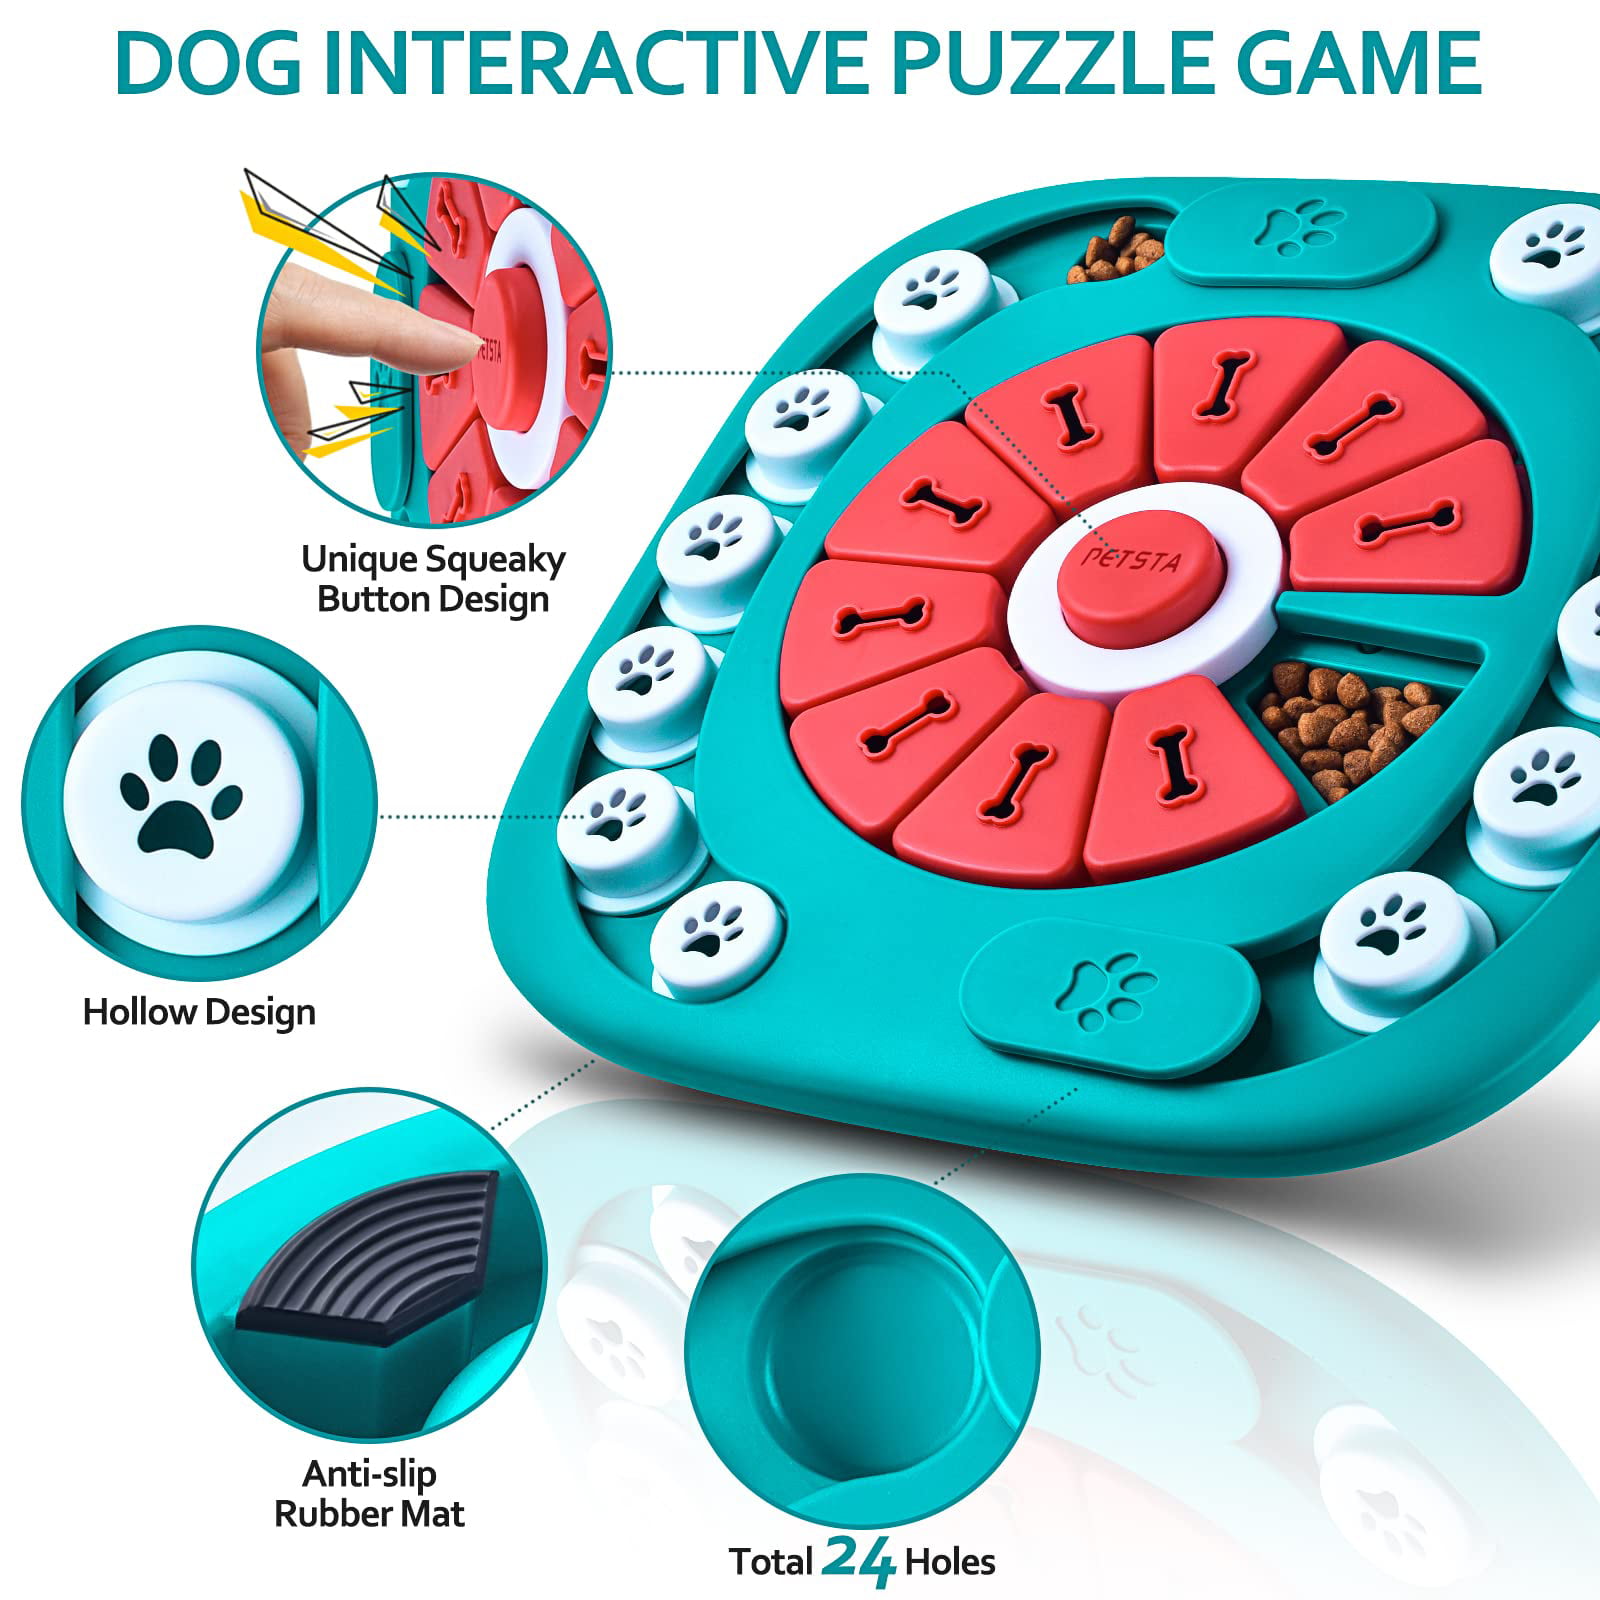 ALL FOR PAWS Dog Puzzle Toys,Treat Dispensing Dog Toys,Dog Enrichment Toys  for IQ Training and Brain Stimulation,Dog Treat Puzzle,Dog Toys Interactive